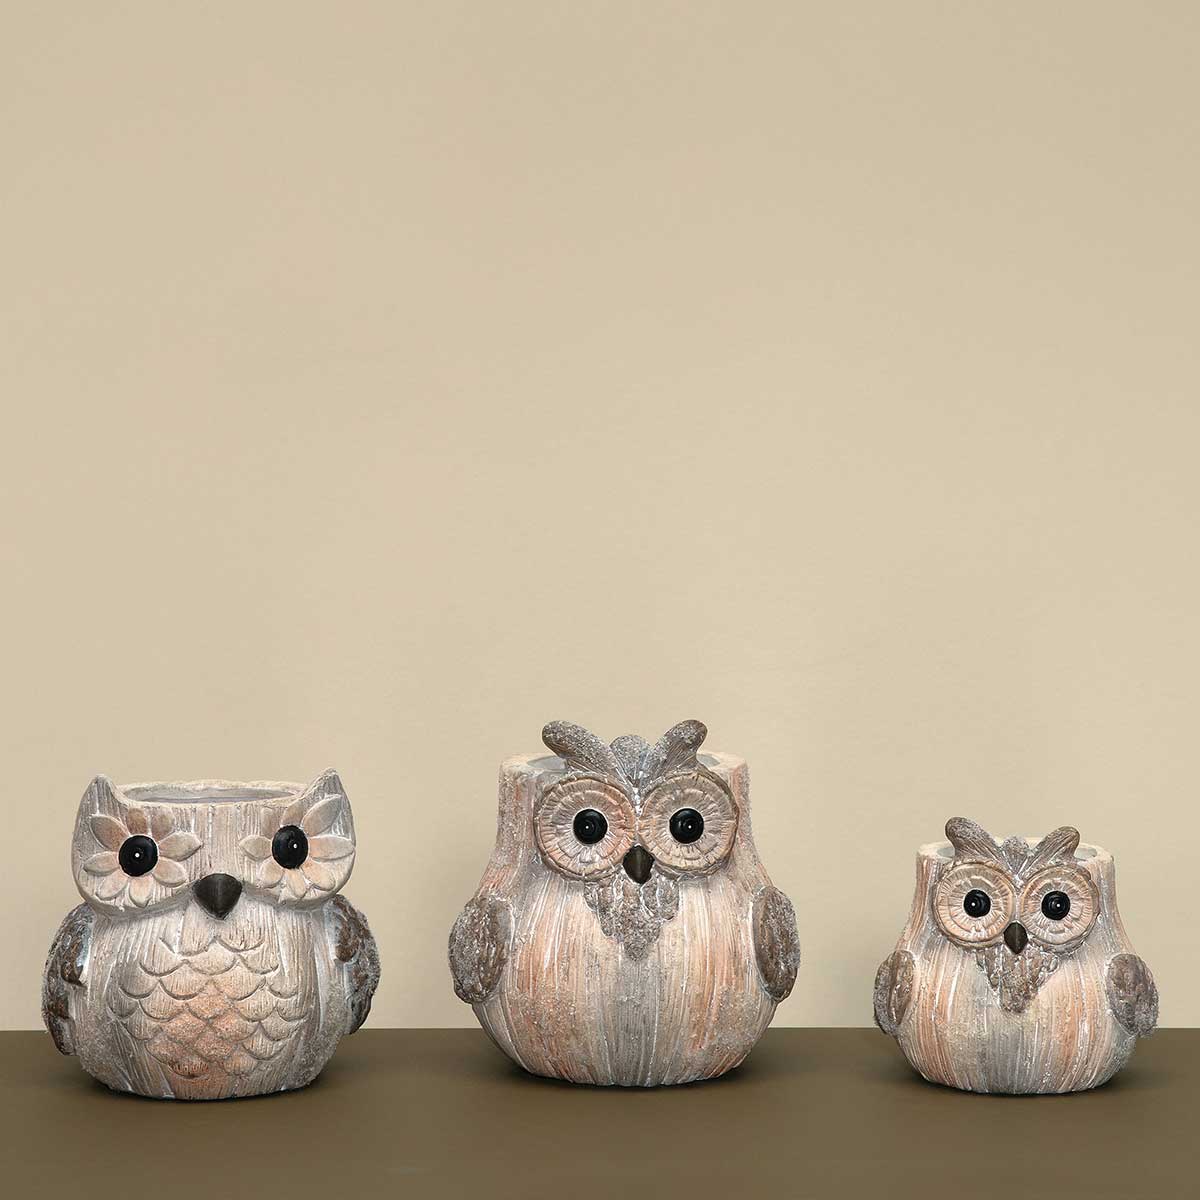 ERROL FROSTED CERAMIC OWL POT CREAM/BROWN WITH MICA